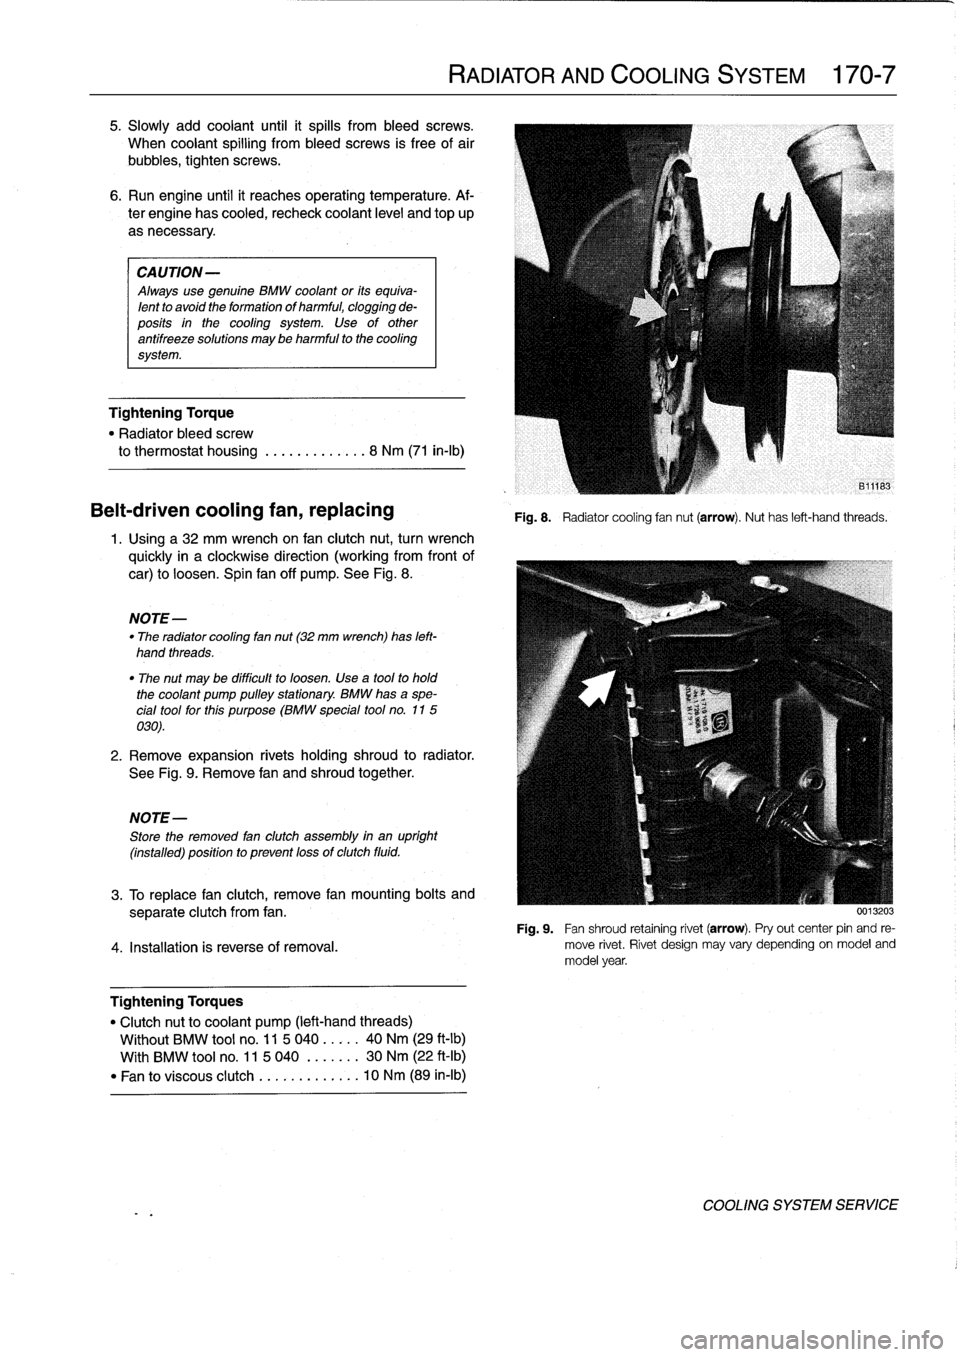 BMW 318i 1997 E36 Workshop Manual 5
.
Slowly
add
coolant
until
it
spills
from
bleed
screws
.

When
coolant
spillíng
from
bleed
screws
is
free
of
air

bubbies,
tighten
screws
.

6
.
Run
engine
until
it
reaches
operatíng
temperature
.